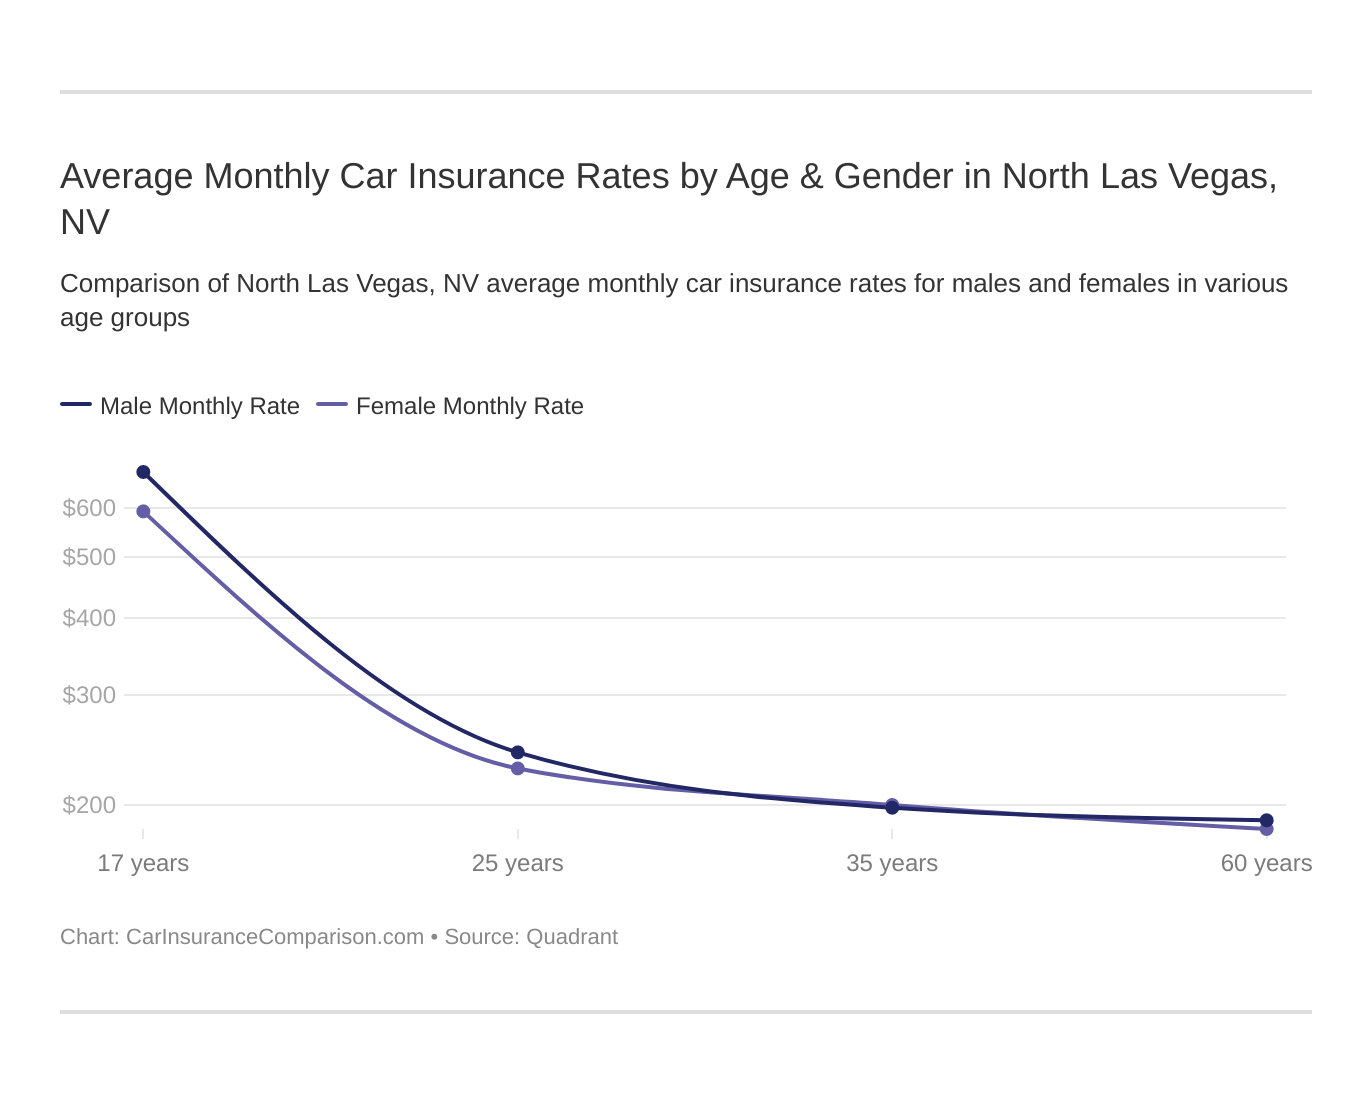 Average Monthly Car Insurance Rates by Age & Gender in North Las Vegas, NV